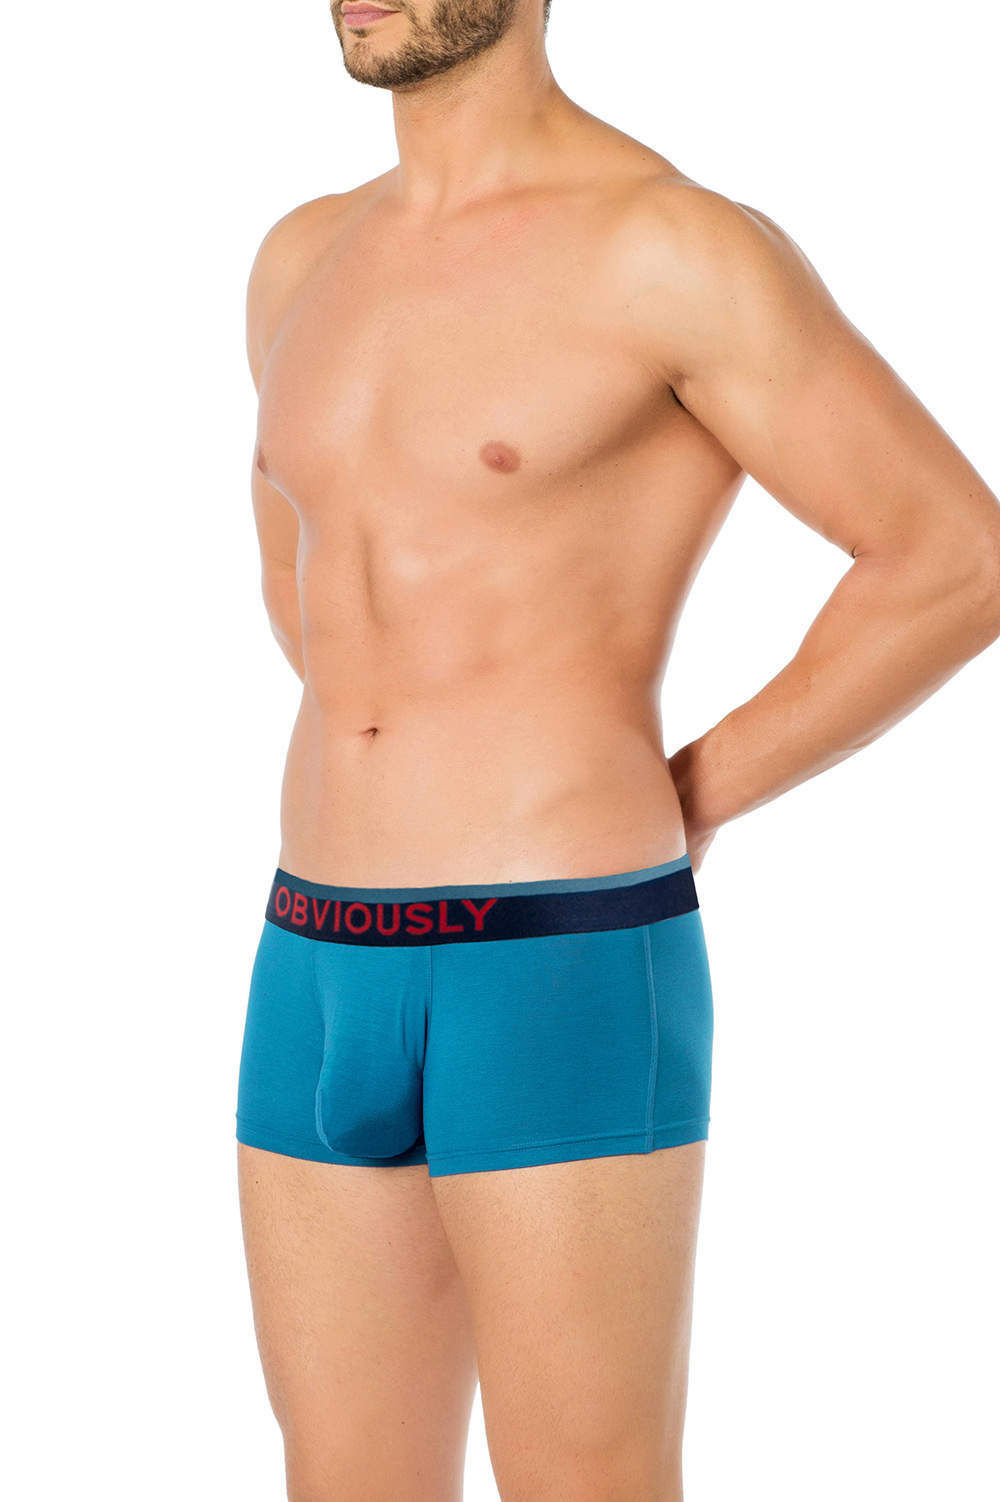 Check out the Obviously Apparel FreeMan Trunks : r/menandunderwear